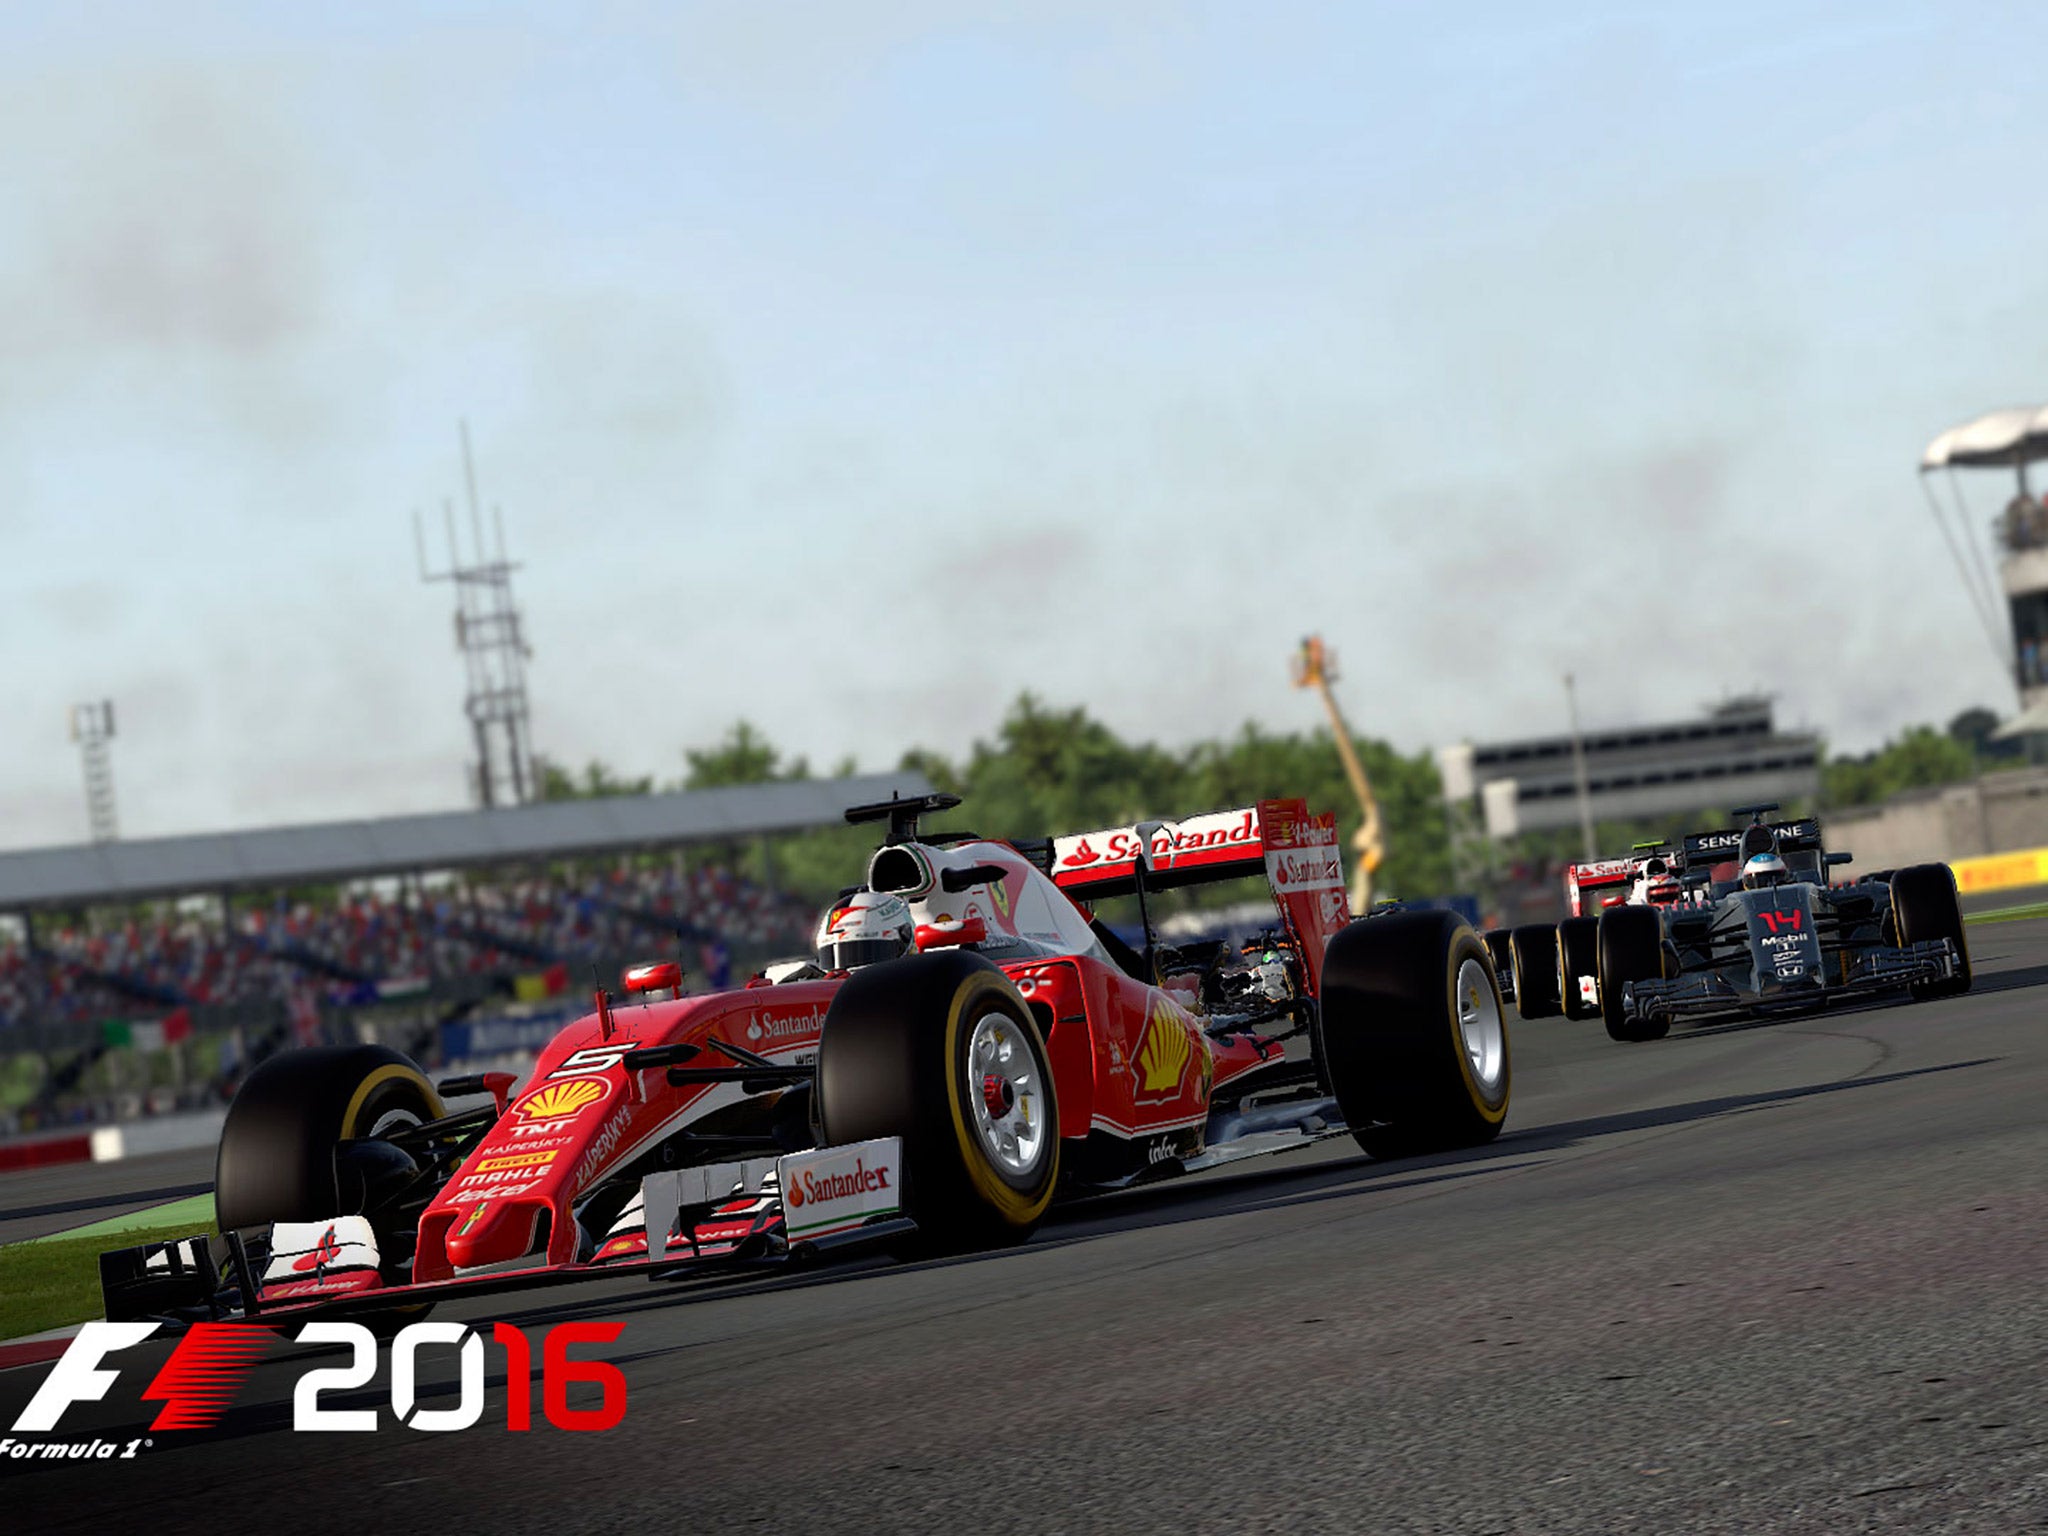 F1 2016 has the depth that F1 2015 lacked